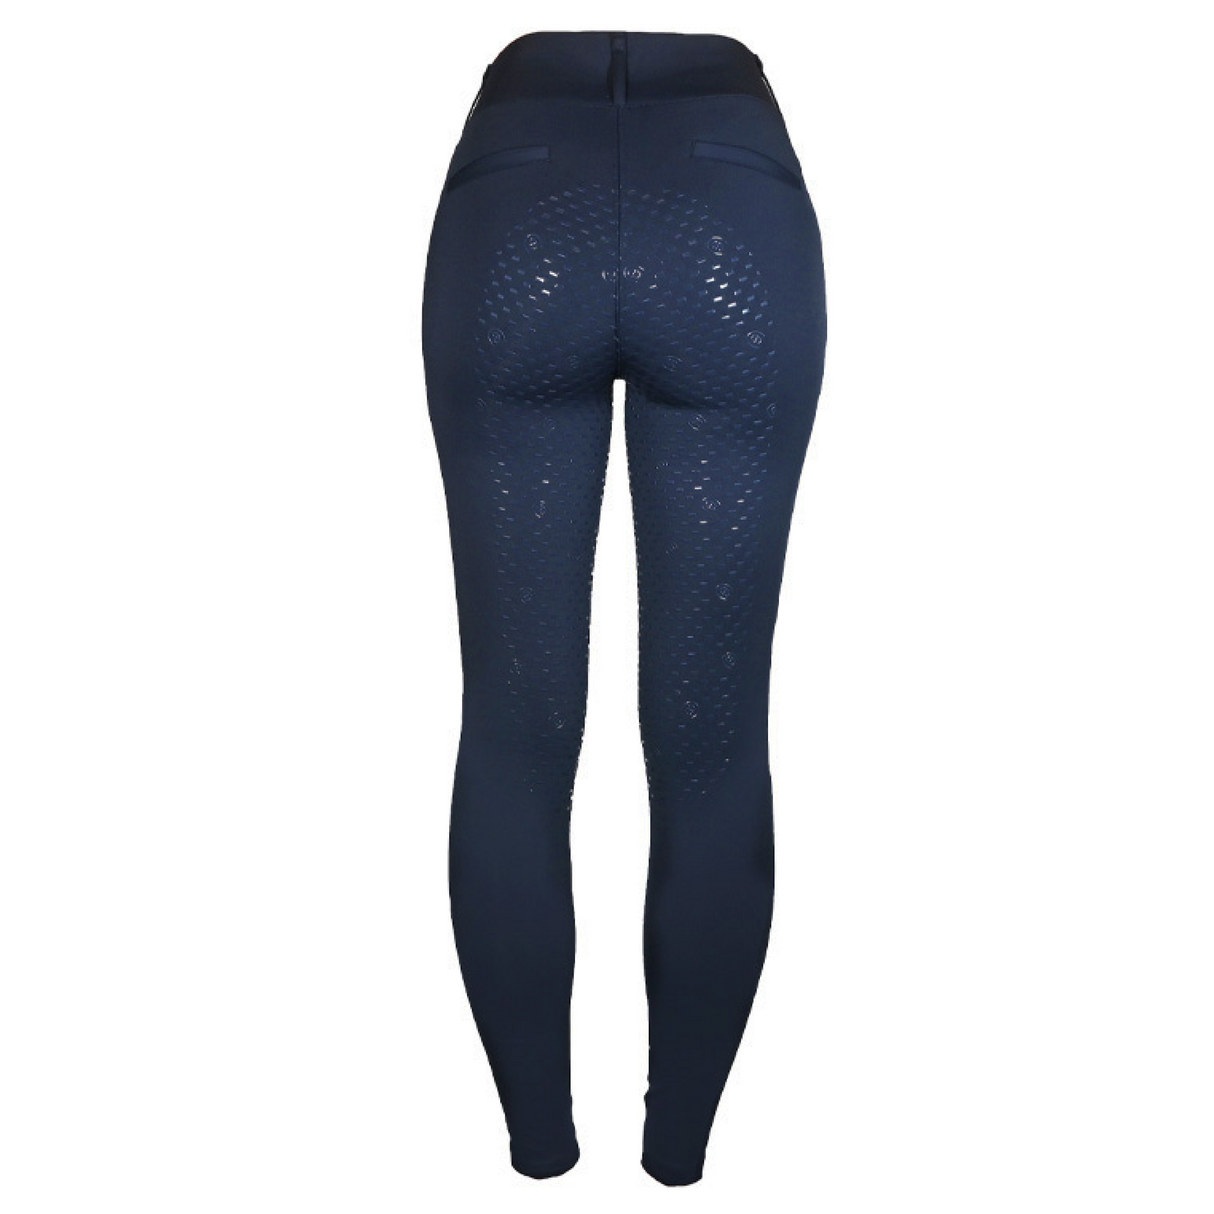 Equestrian Stockholm Compression Dressage Breeches Royal Classic